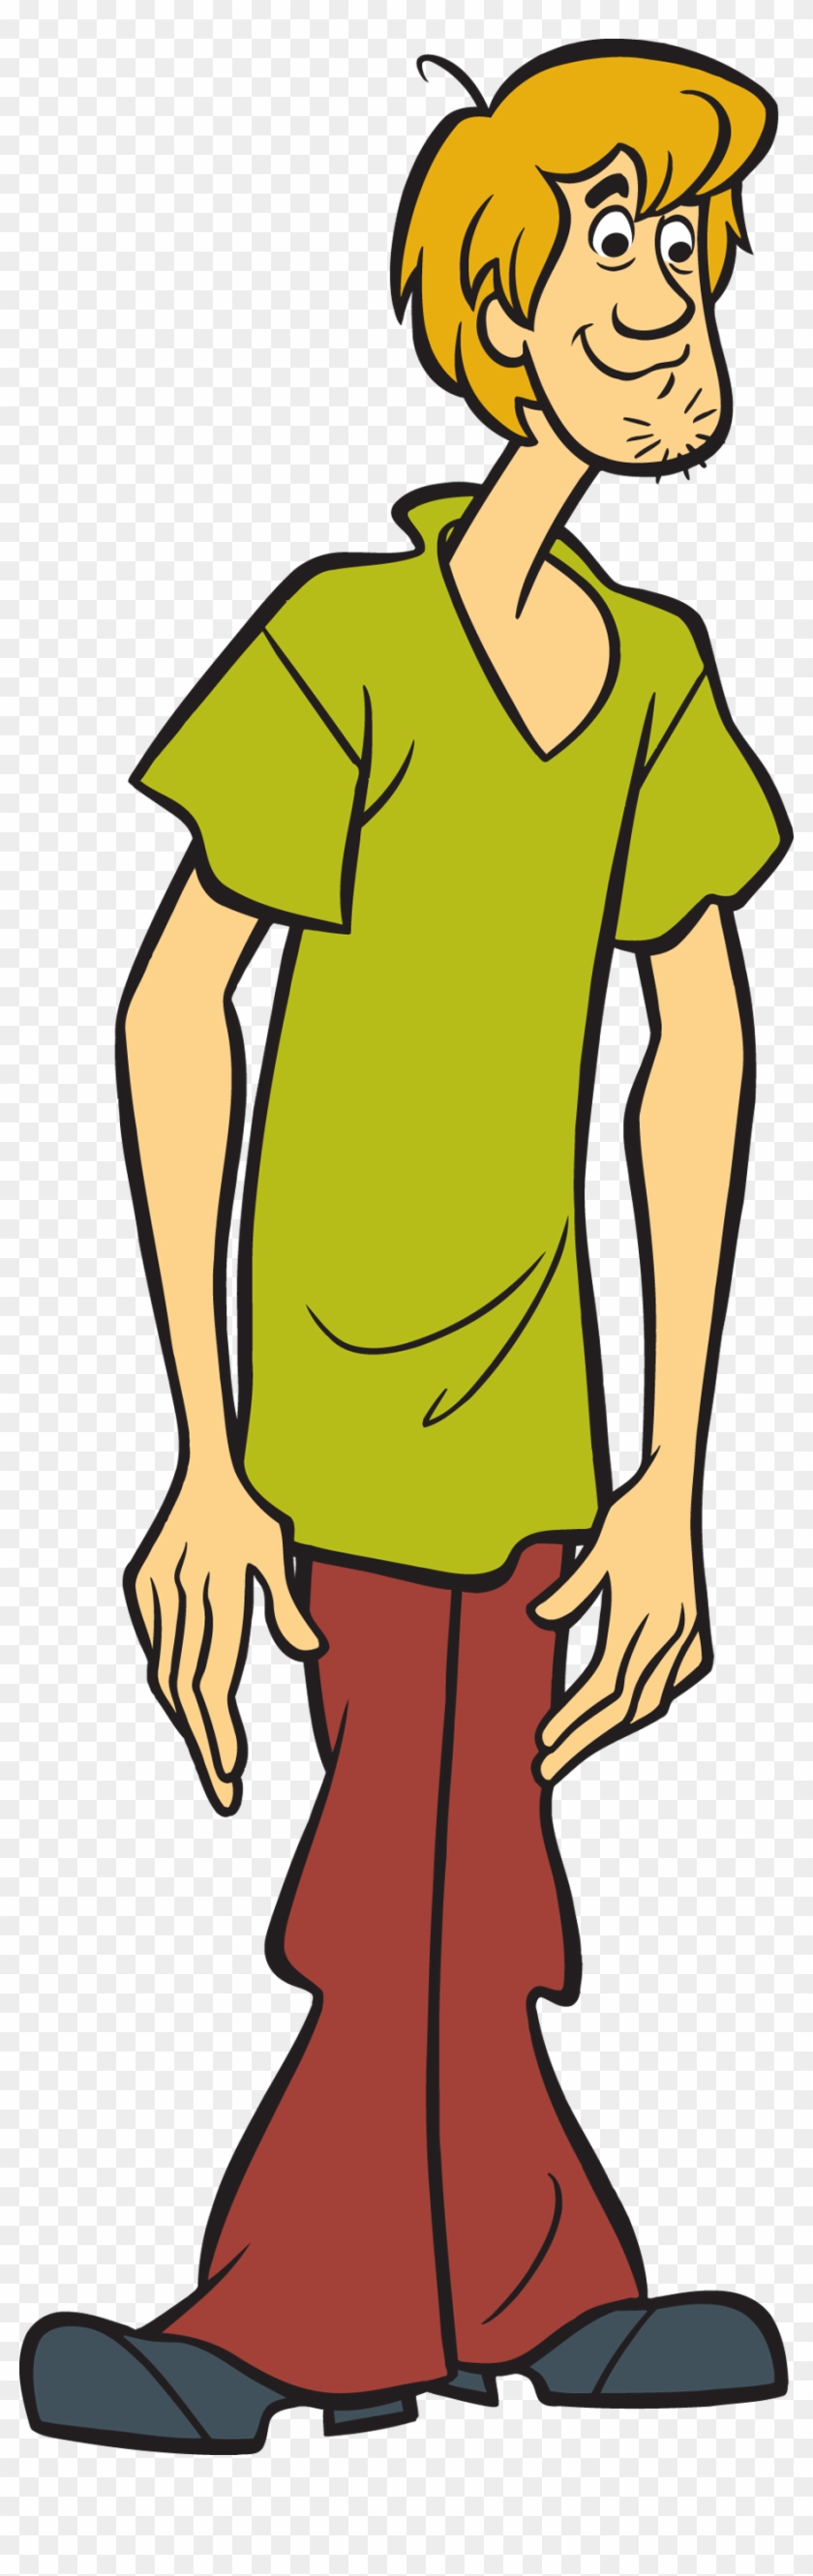 Shaggy Rogers - Man From Scooby Doo #389477